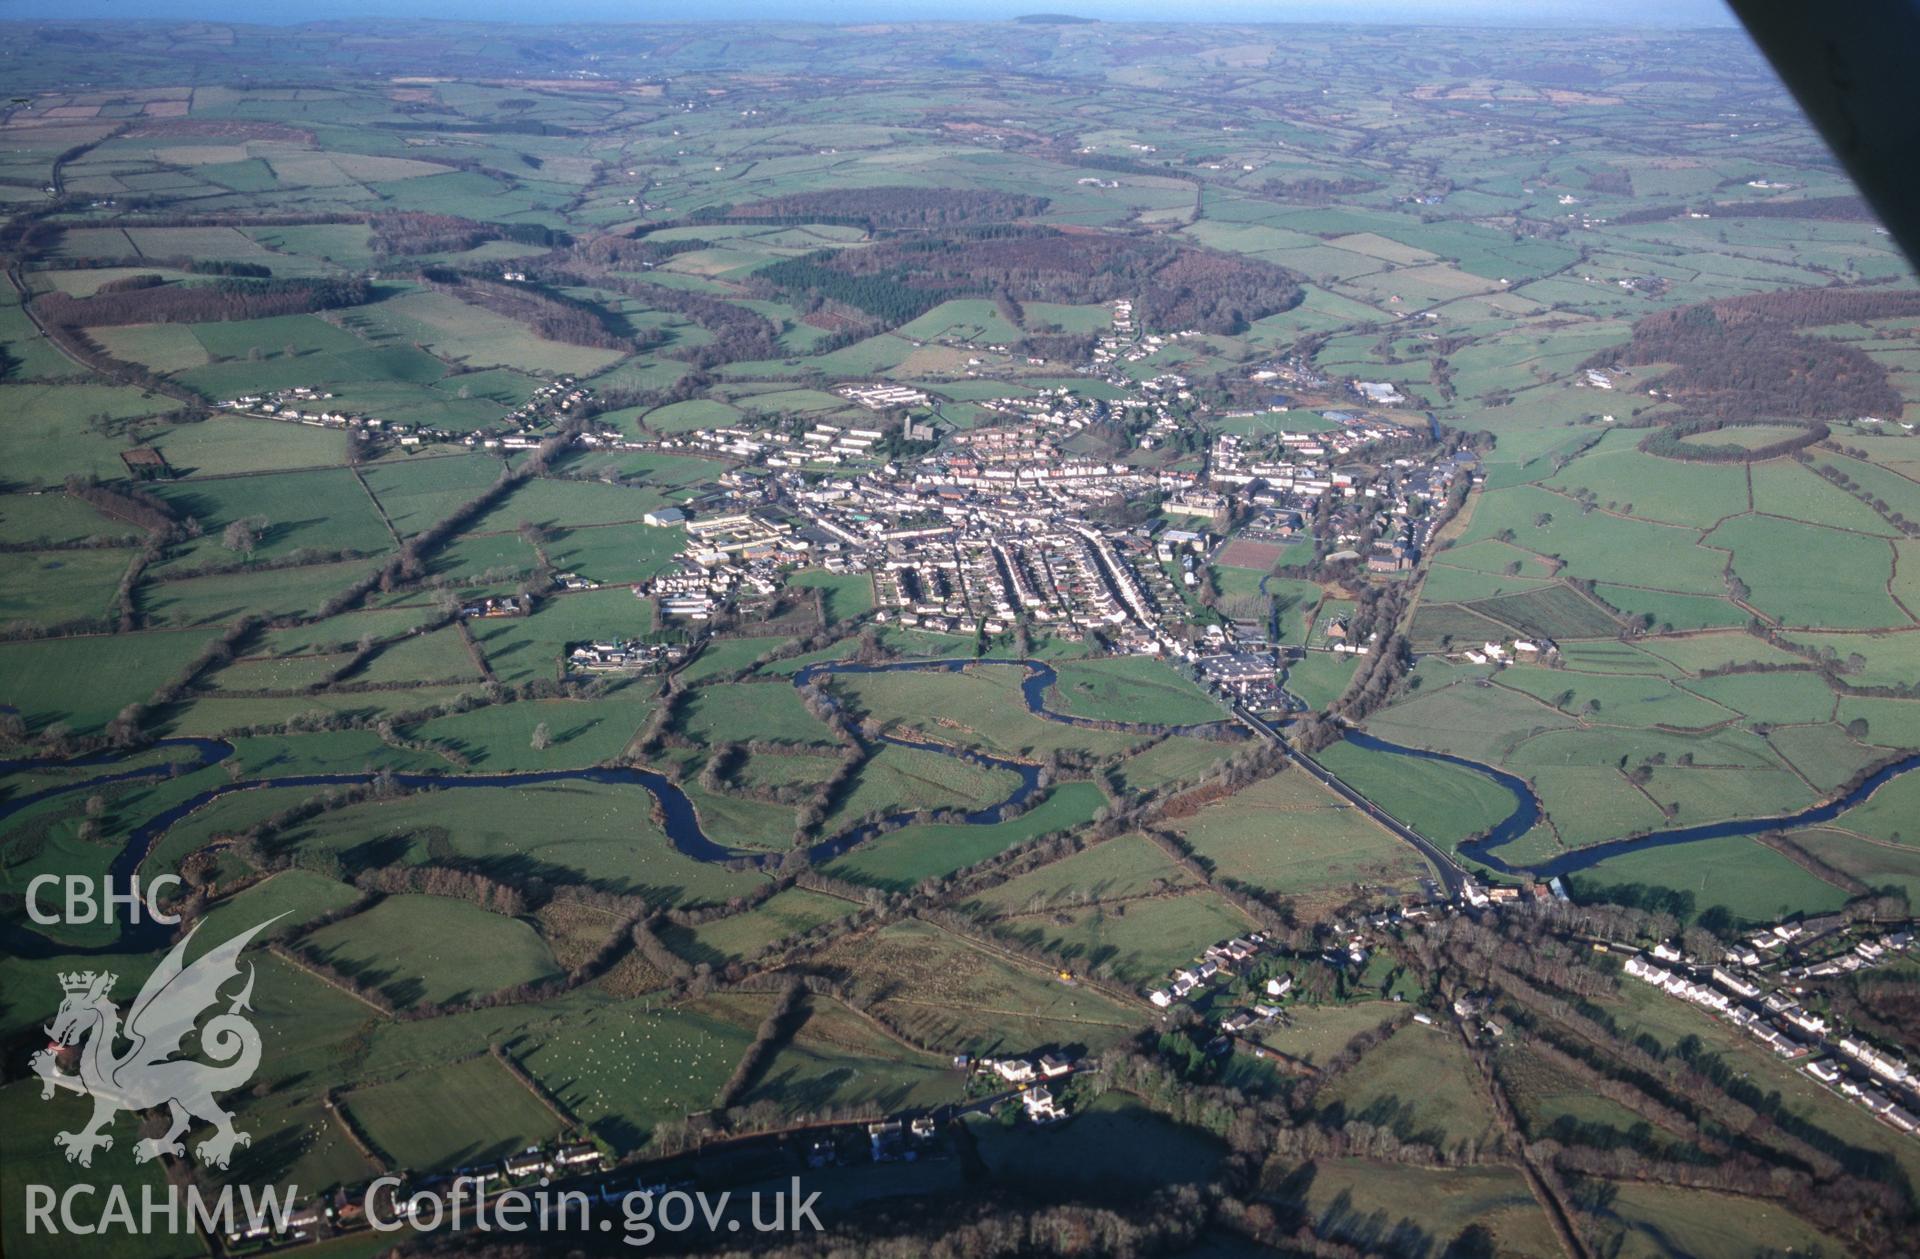 Slide of RCAHMW colour oblique aerial photograph of Lampeter, taken by T.G. Driver, 4/12/1998.